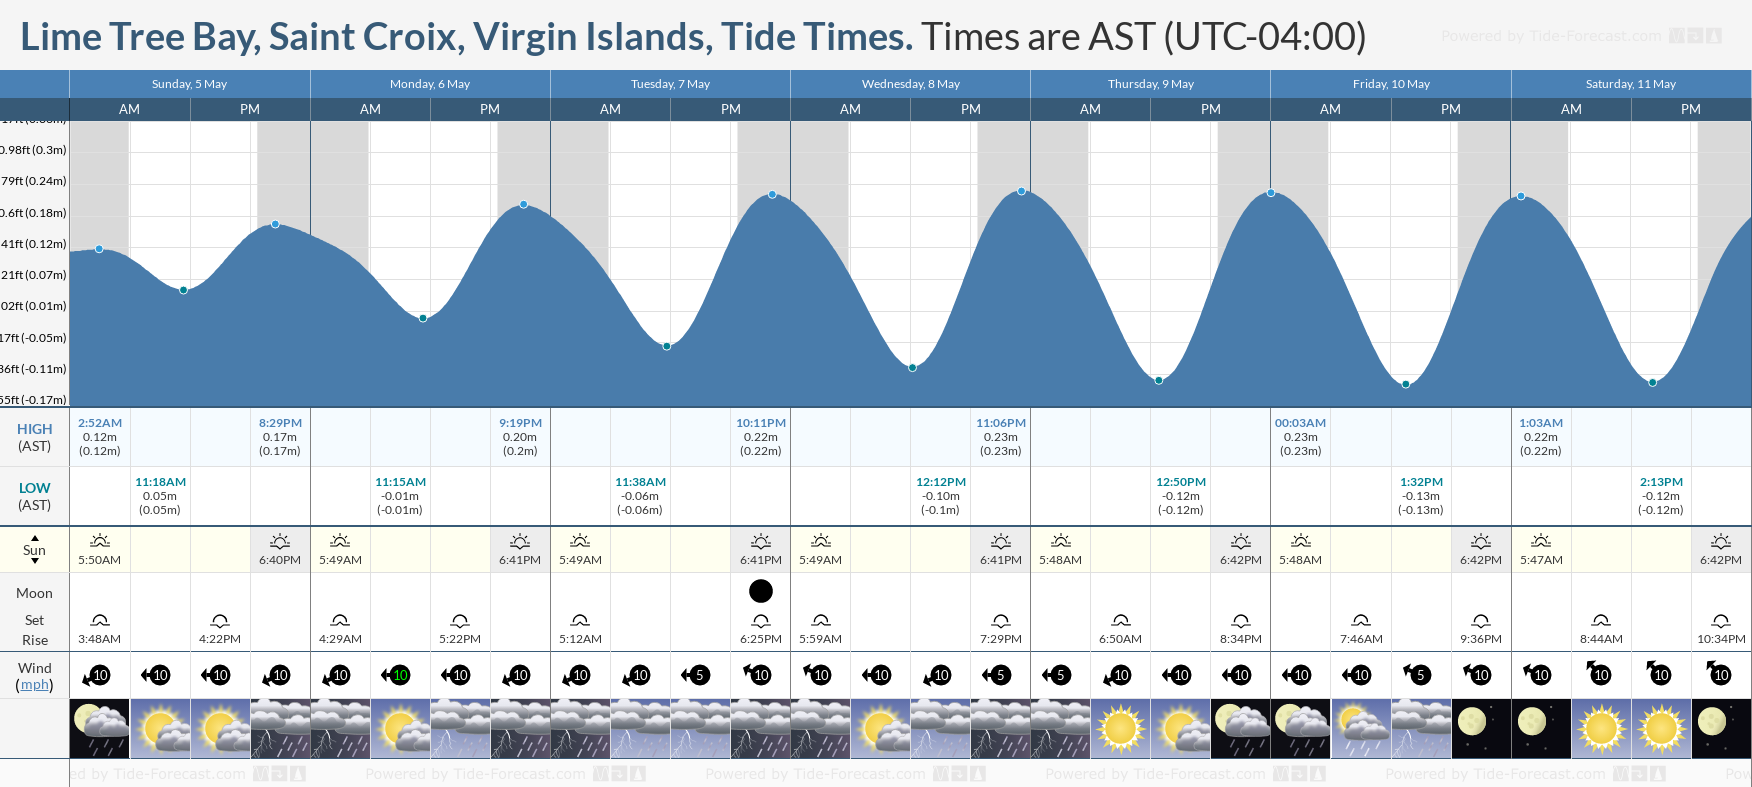 Lime Tree Bay, Saint Croix, Virgin Islands Tide Chart including high and low tide tide times for the next 7 days